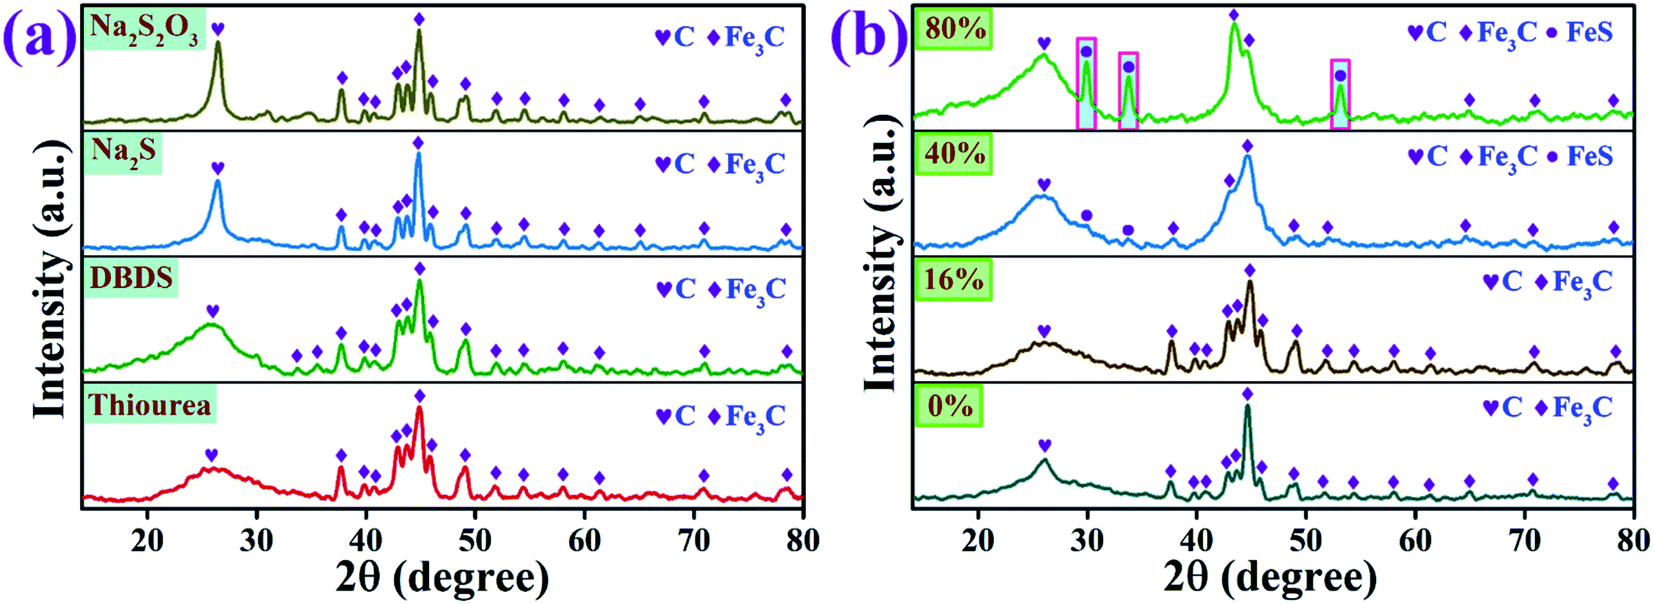 Rational Design Of A Highly Mesoporous Fe N C Fe 3 C C S C Nanohybrid With Dense Active Sites For Superb Electrocatalysis Of Oxygen Reduction Journal Of Materials Chemistry A Rsc Publishing Doi 10 1039 D0taf